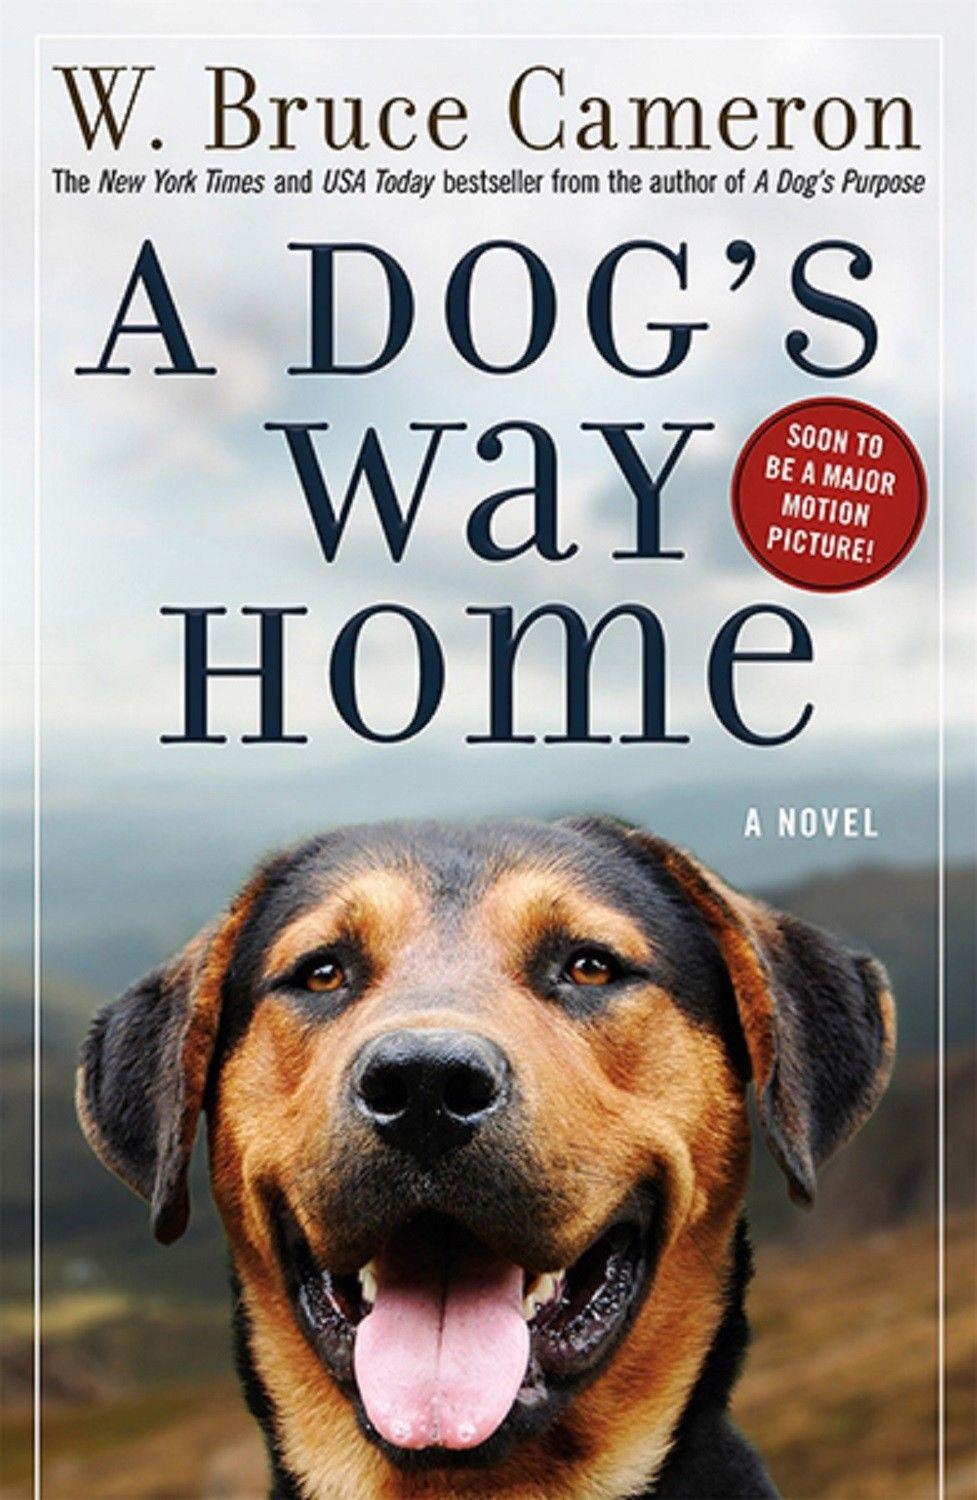 A Dog's Way Home by W. Bruce Cameron ( Paperback)